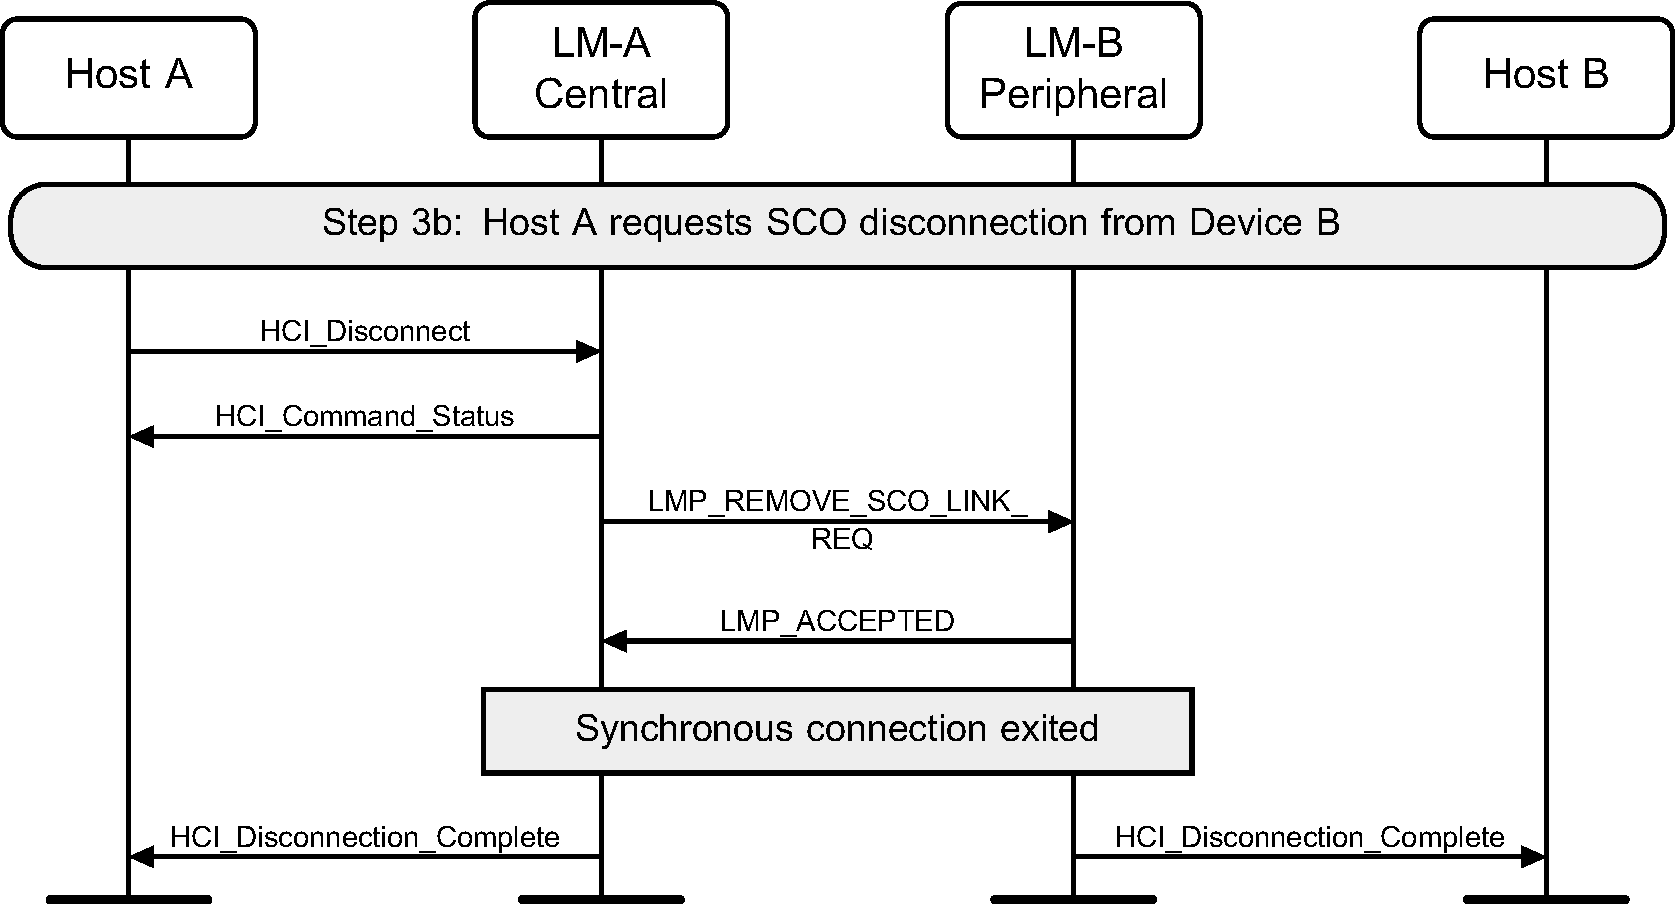 Synchronous disconnection of SCO connection